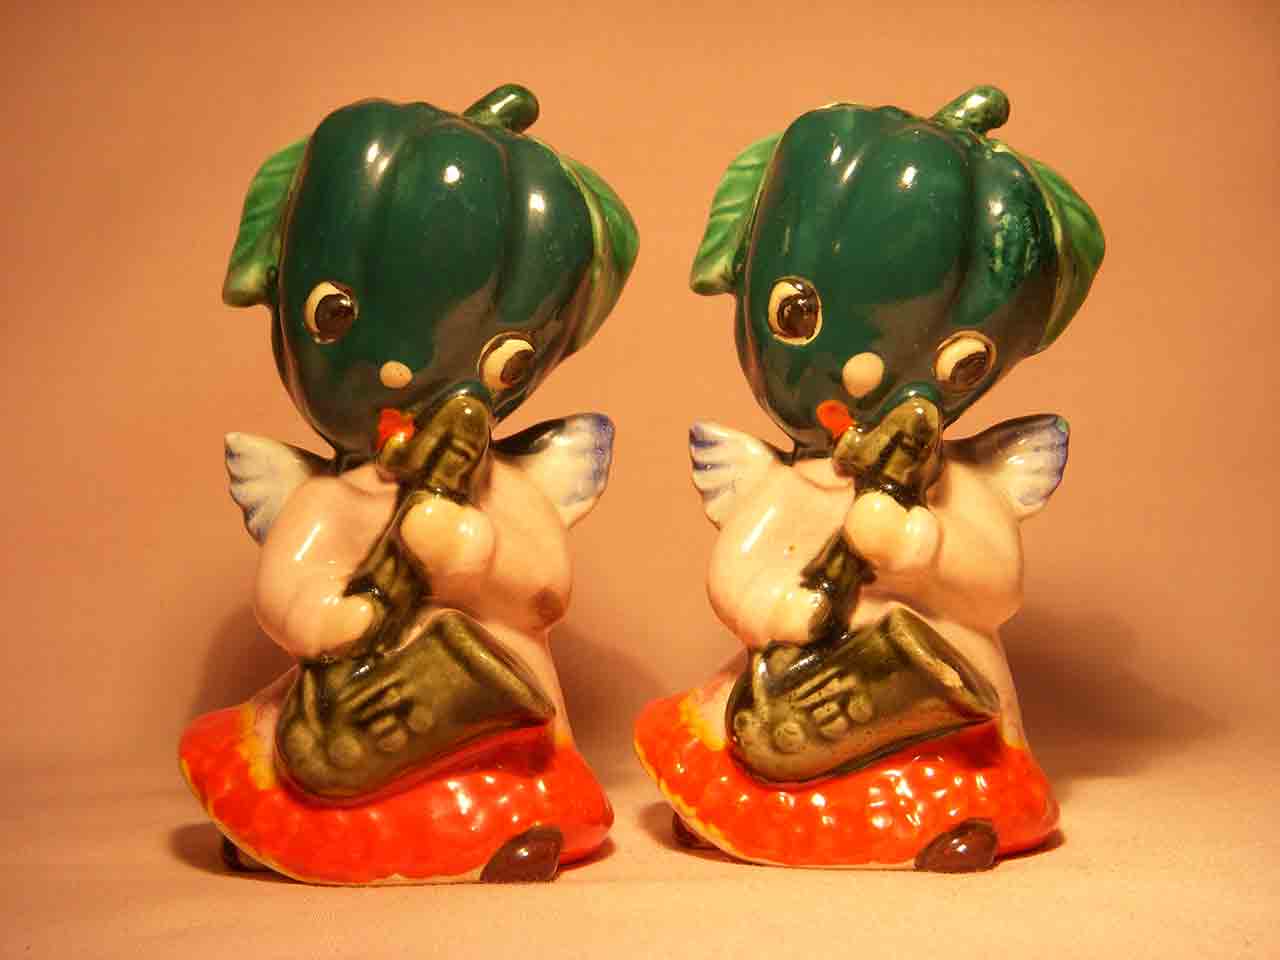 Anthropomorphic green peppers playing saxophones - Heavenly Music series - salt and pepper shakers